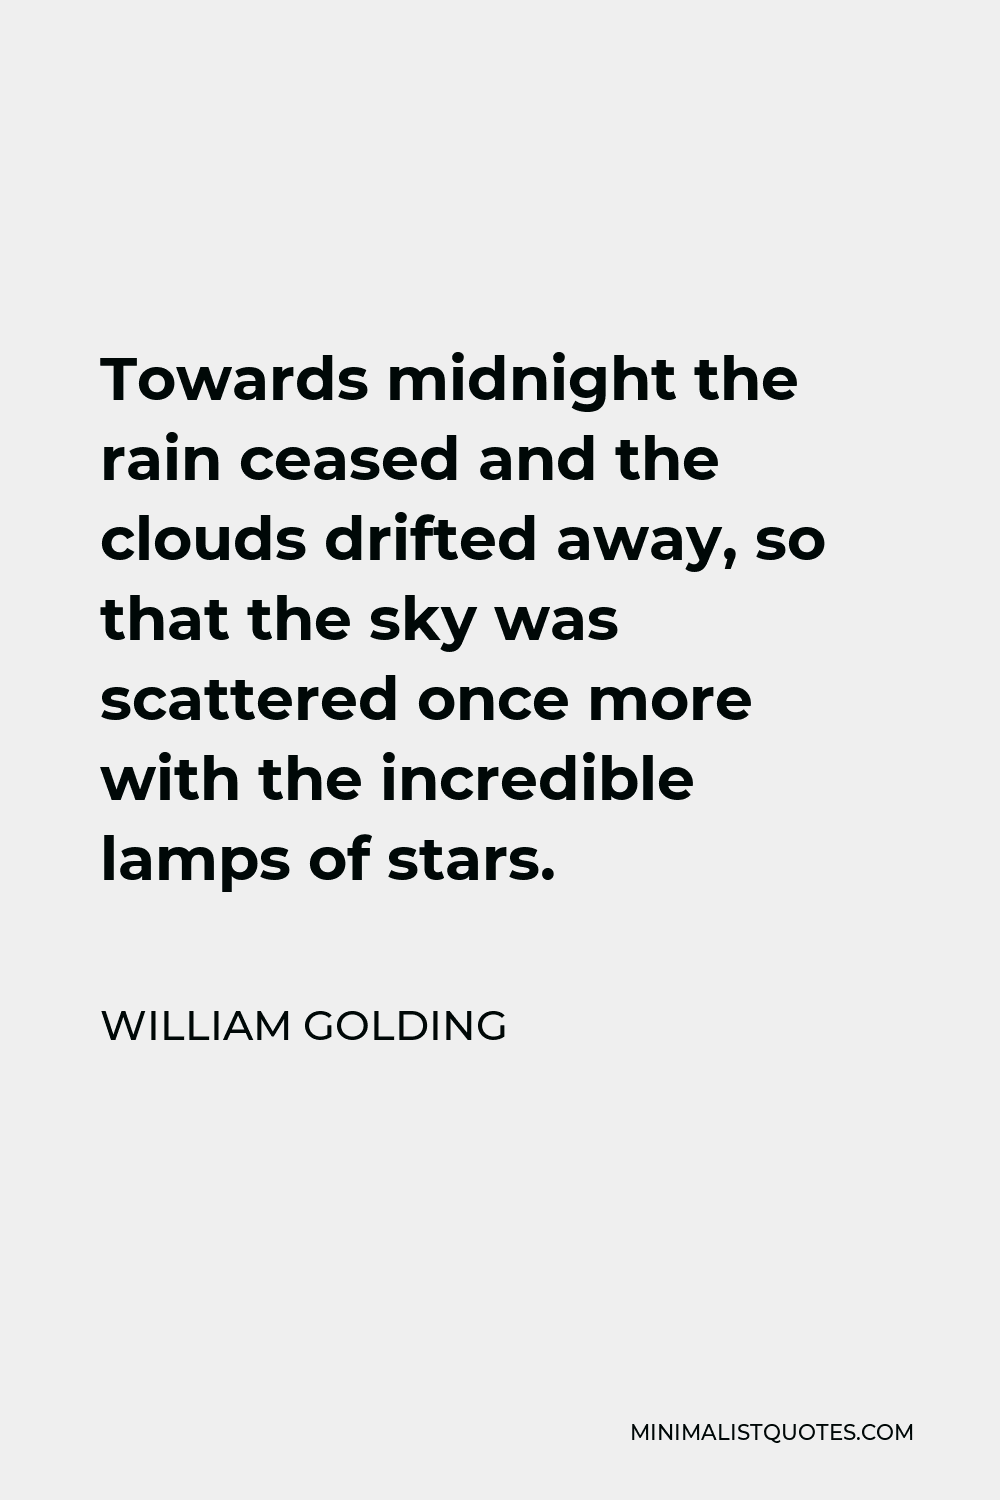 William Golding Quote - Towards midnight the rain ceased and the clouds drifted away, so that the sky was scattered once more with the incredible lamps of stars.